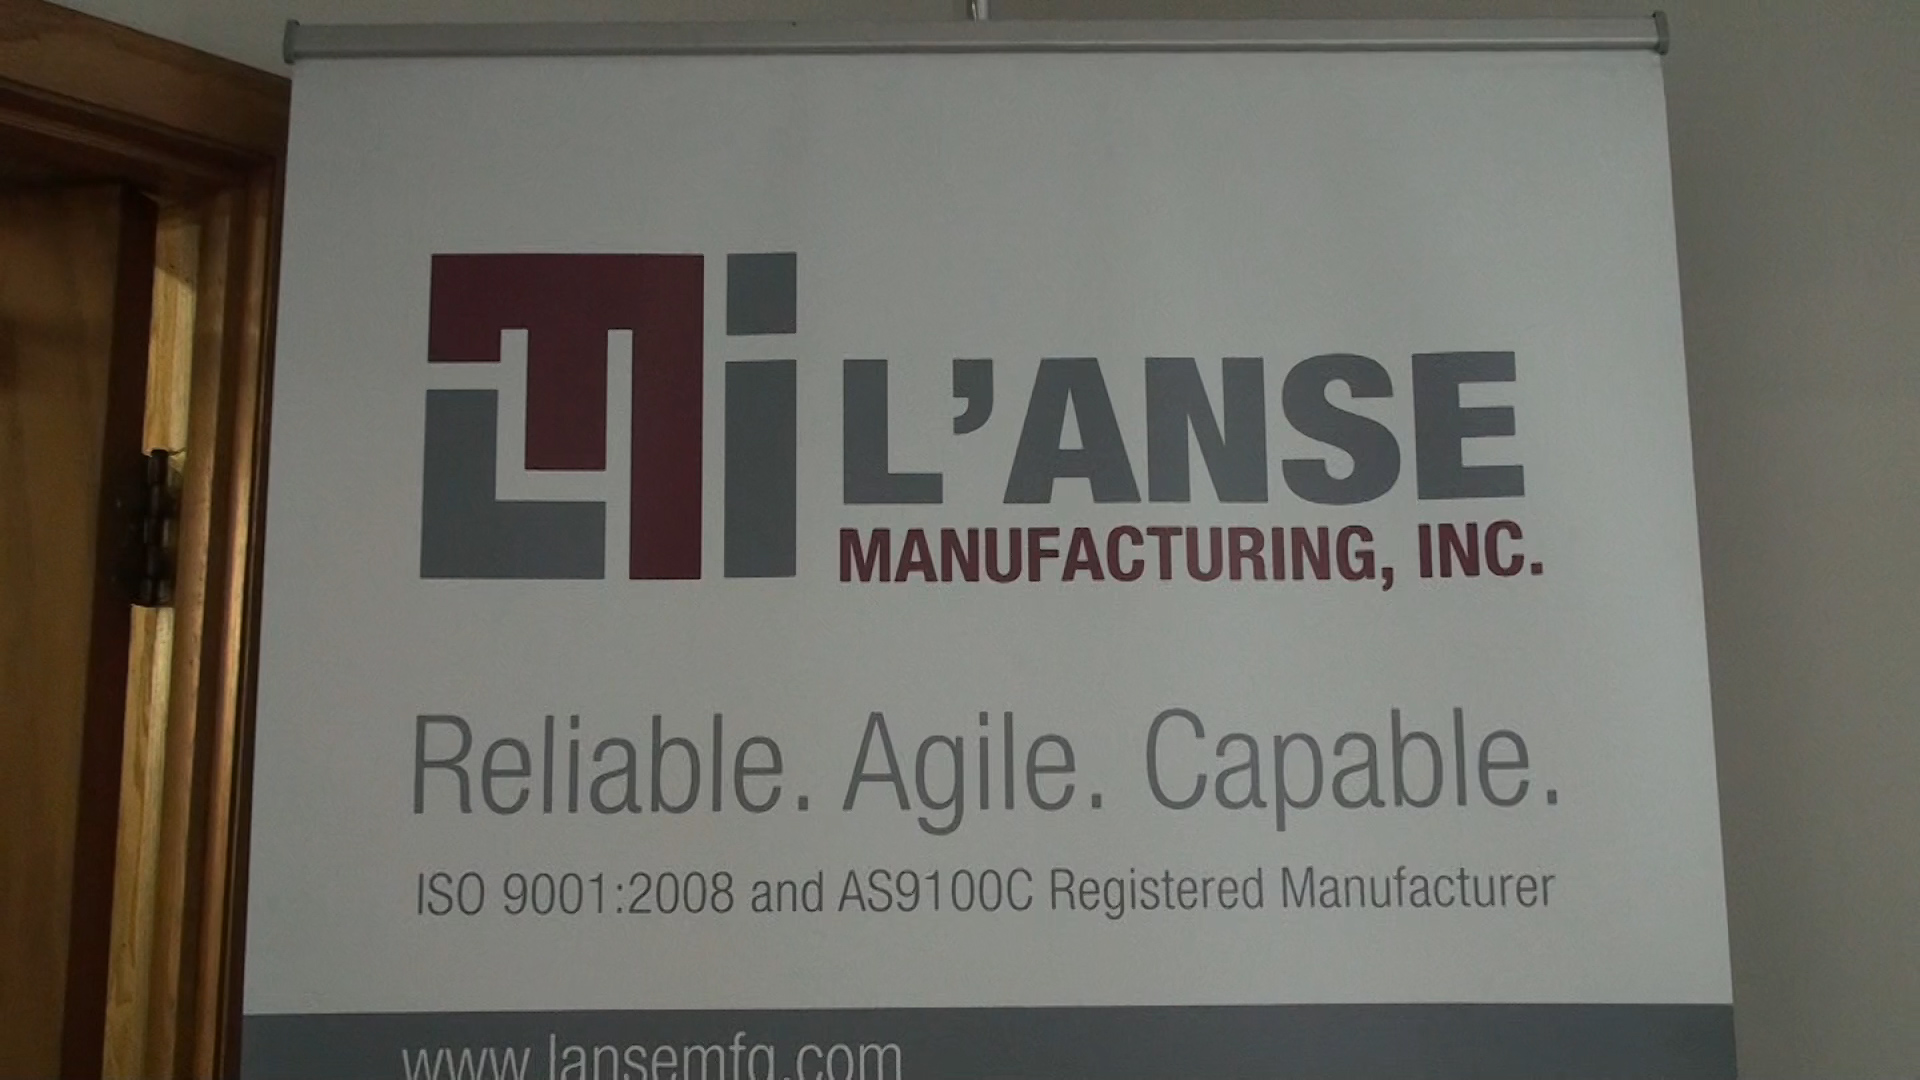 L'anse Manufacturing, Inc. Reliable. Agile. Capable. ISO 9001:2008 and AS9100c Registered Manufacturer